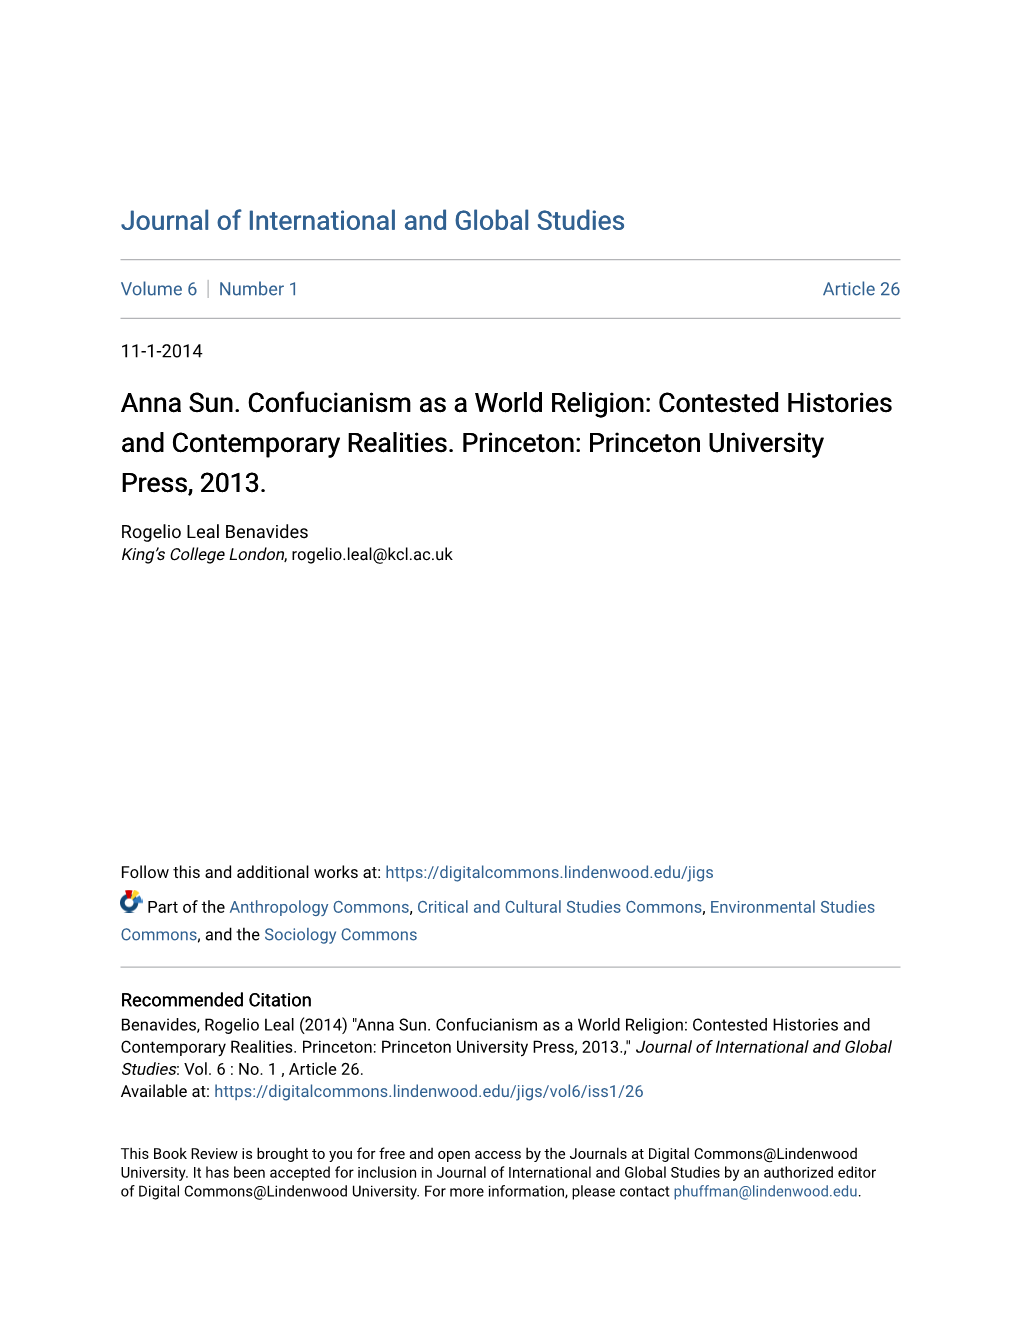 Anna Sun. Confucianism As a World Religion: Contested Histories and Contemporary Realities